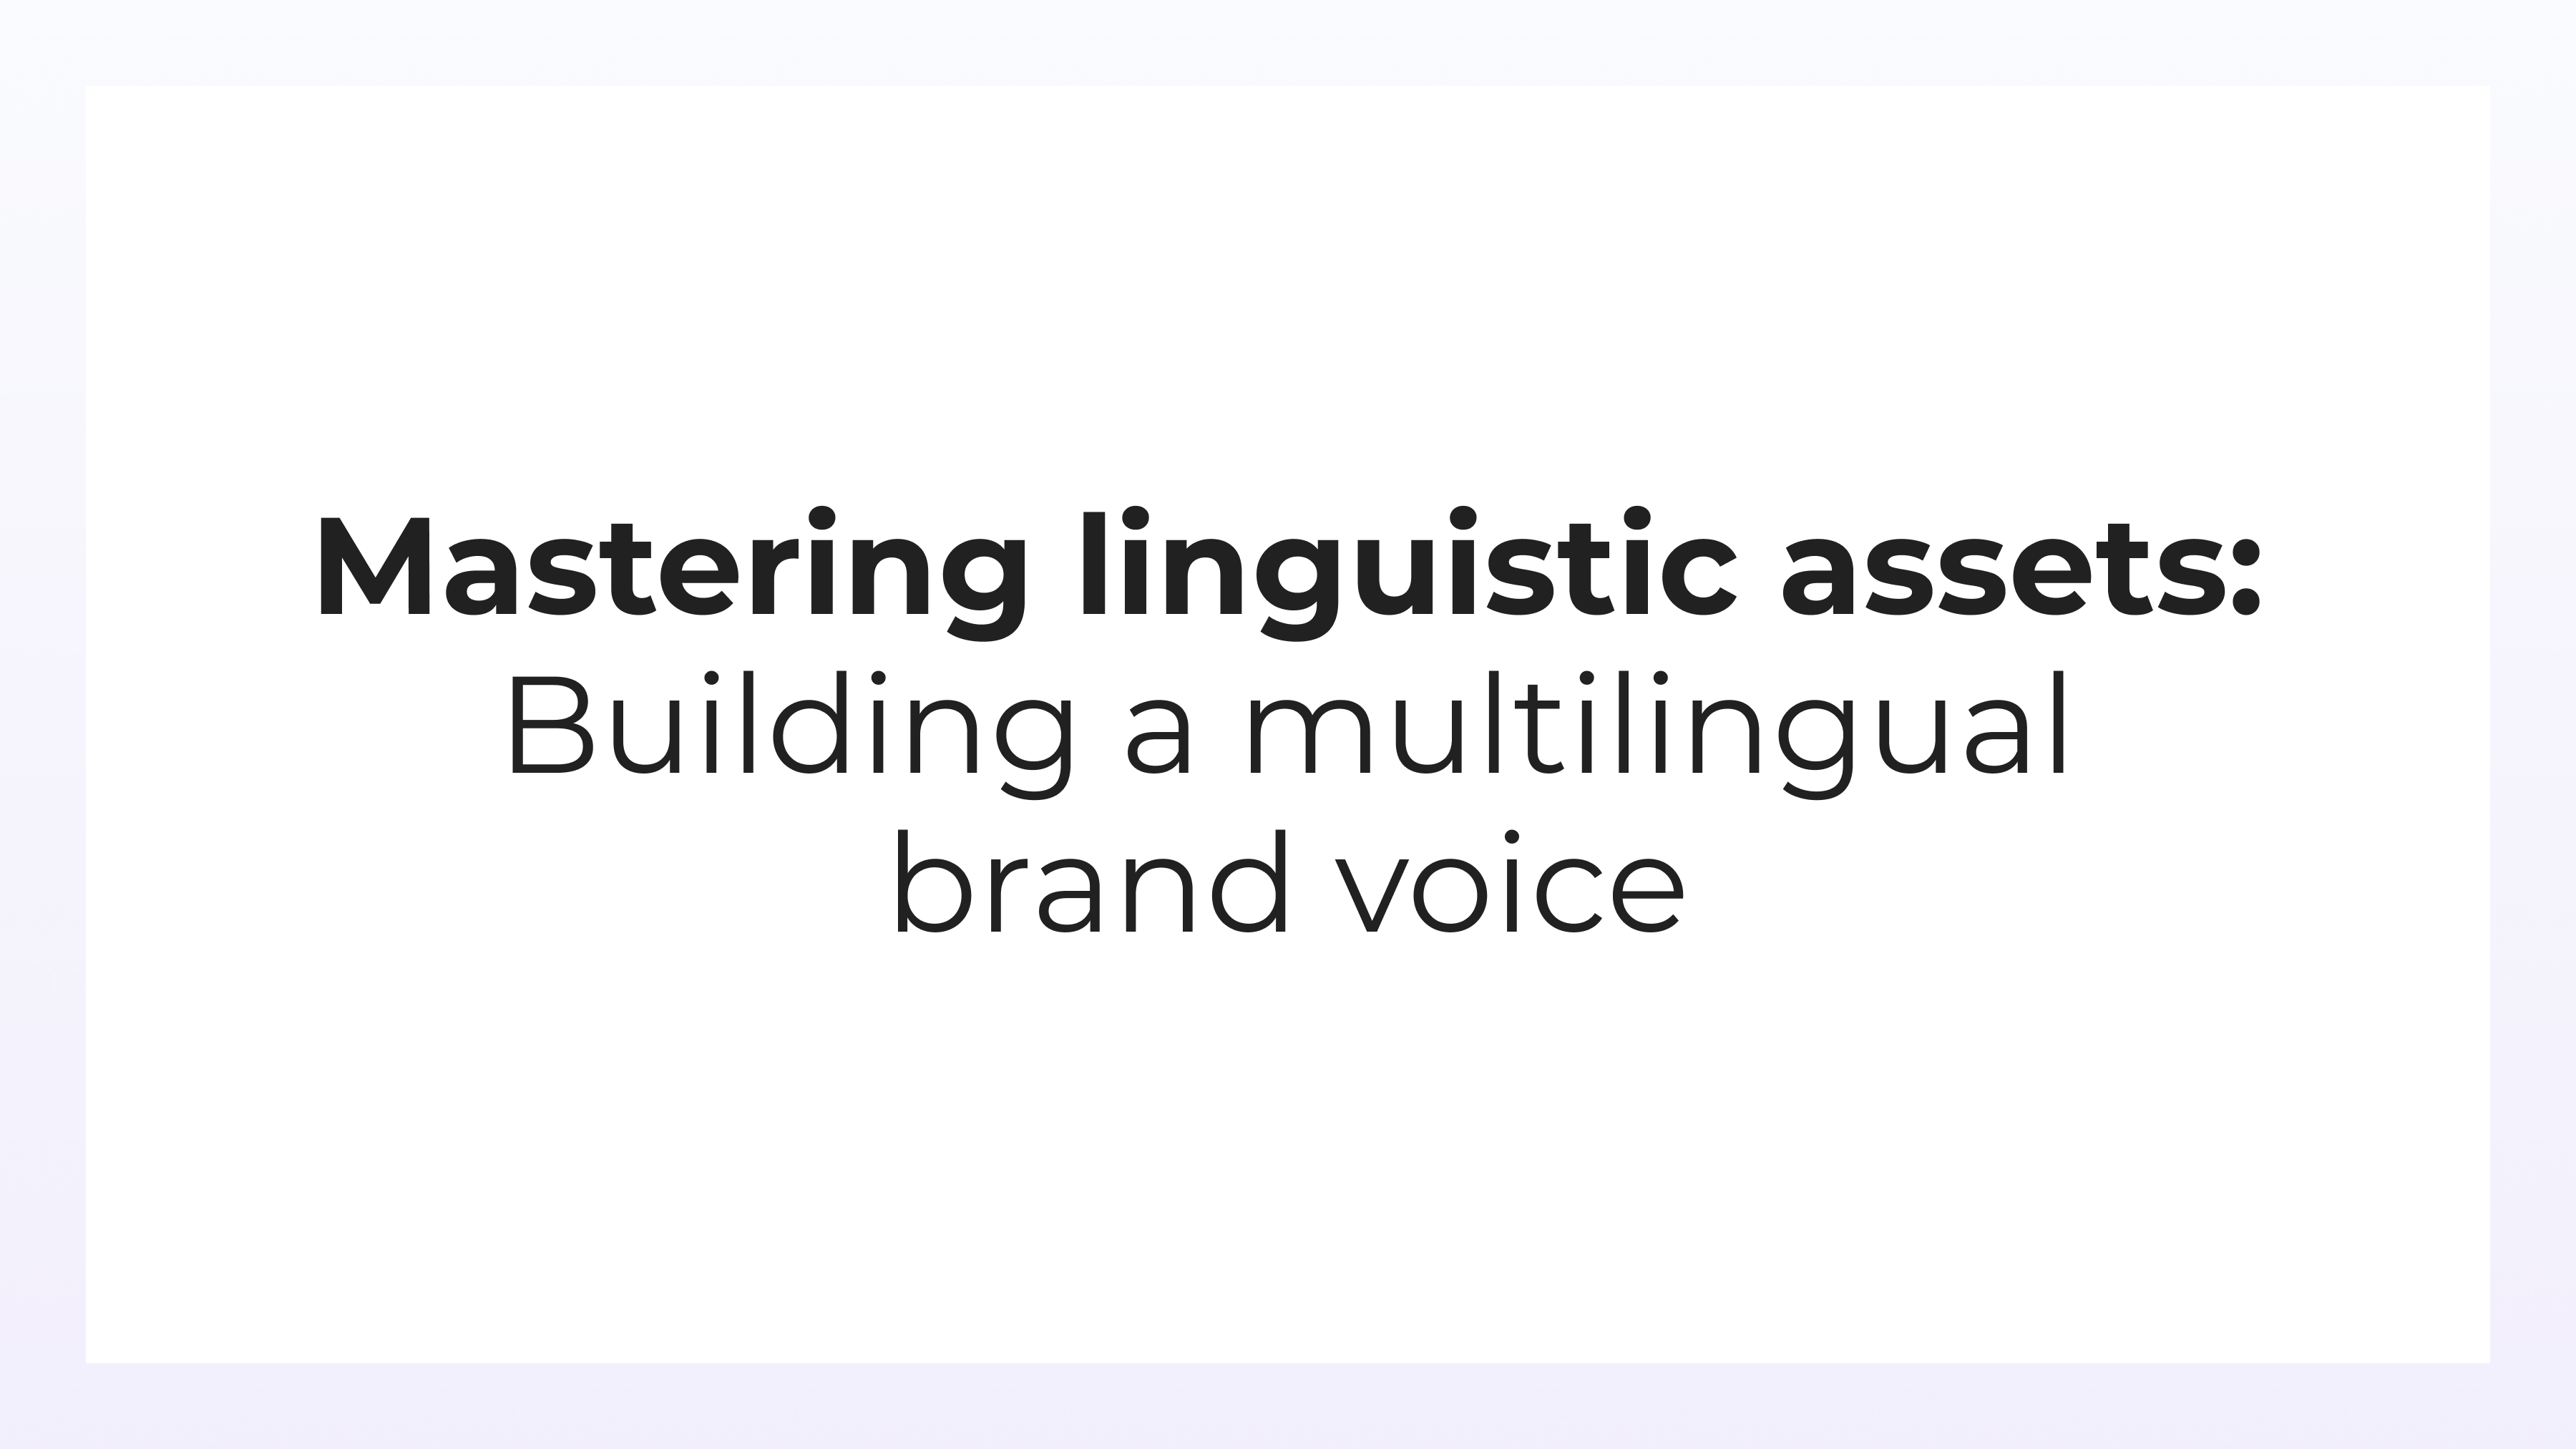 Linguistic assets can make a huge difference on their ability to get high-quality, brand compliant, and cost-effective translations. But they need help to understand what linguistic assets are for, how they should be created, and how they need to be maintained to get the most value.